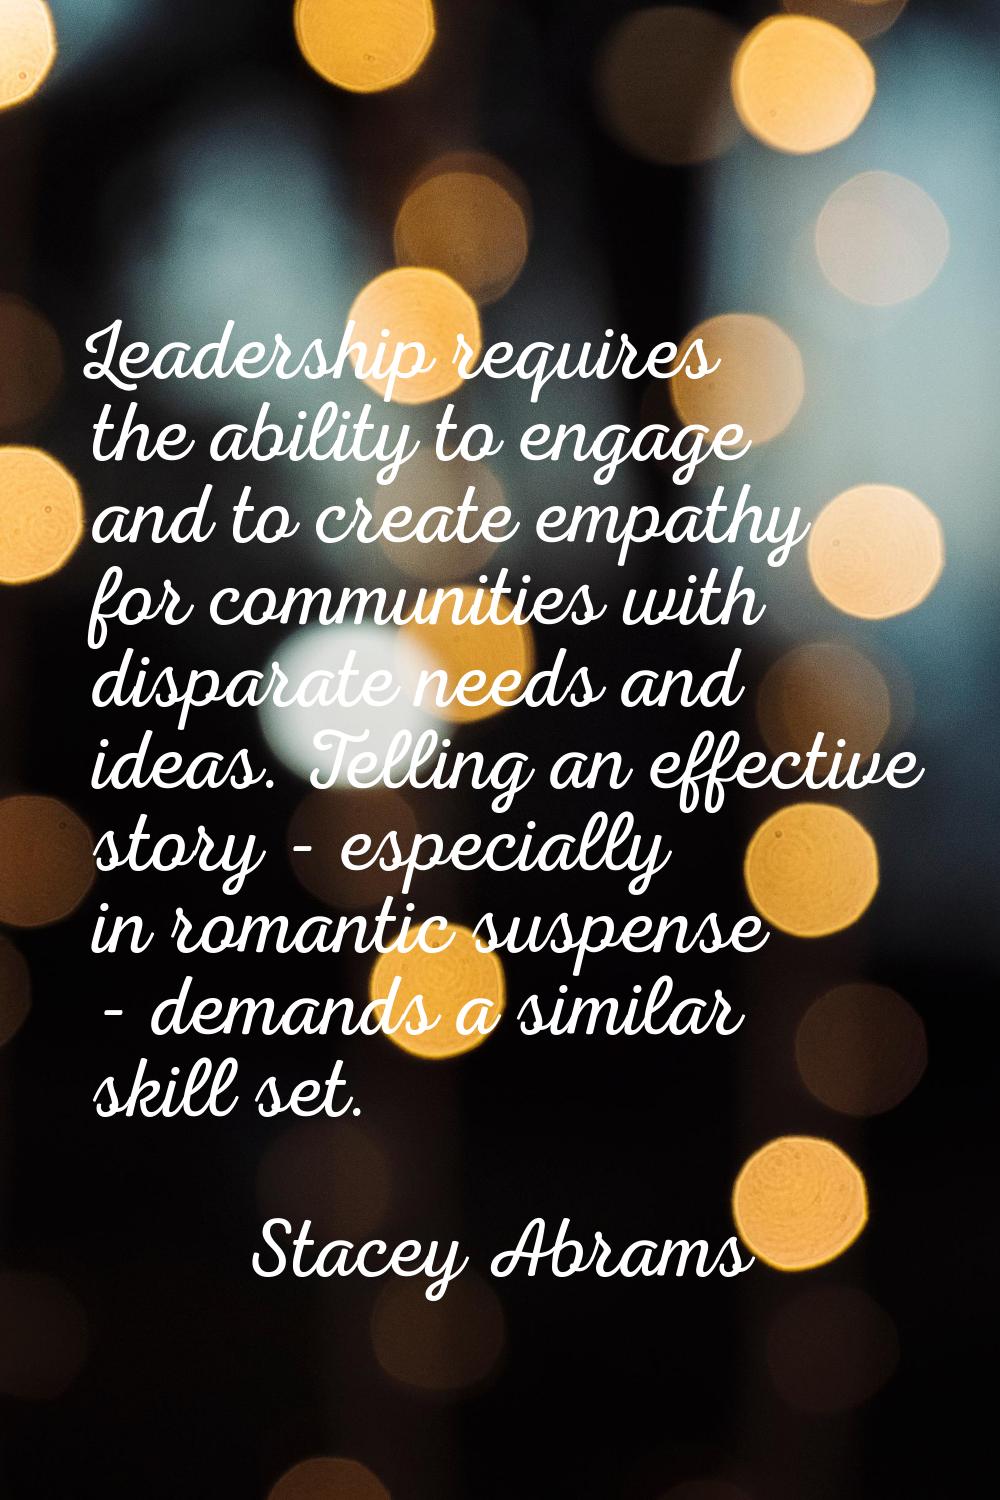 Leadership requires the ability to engage and to create empathy for communities with disparate need